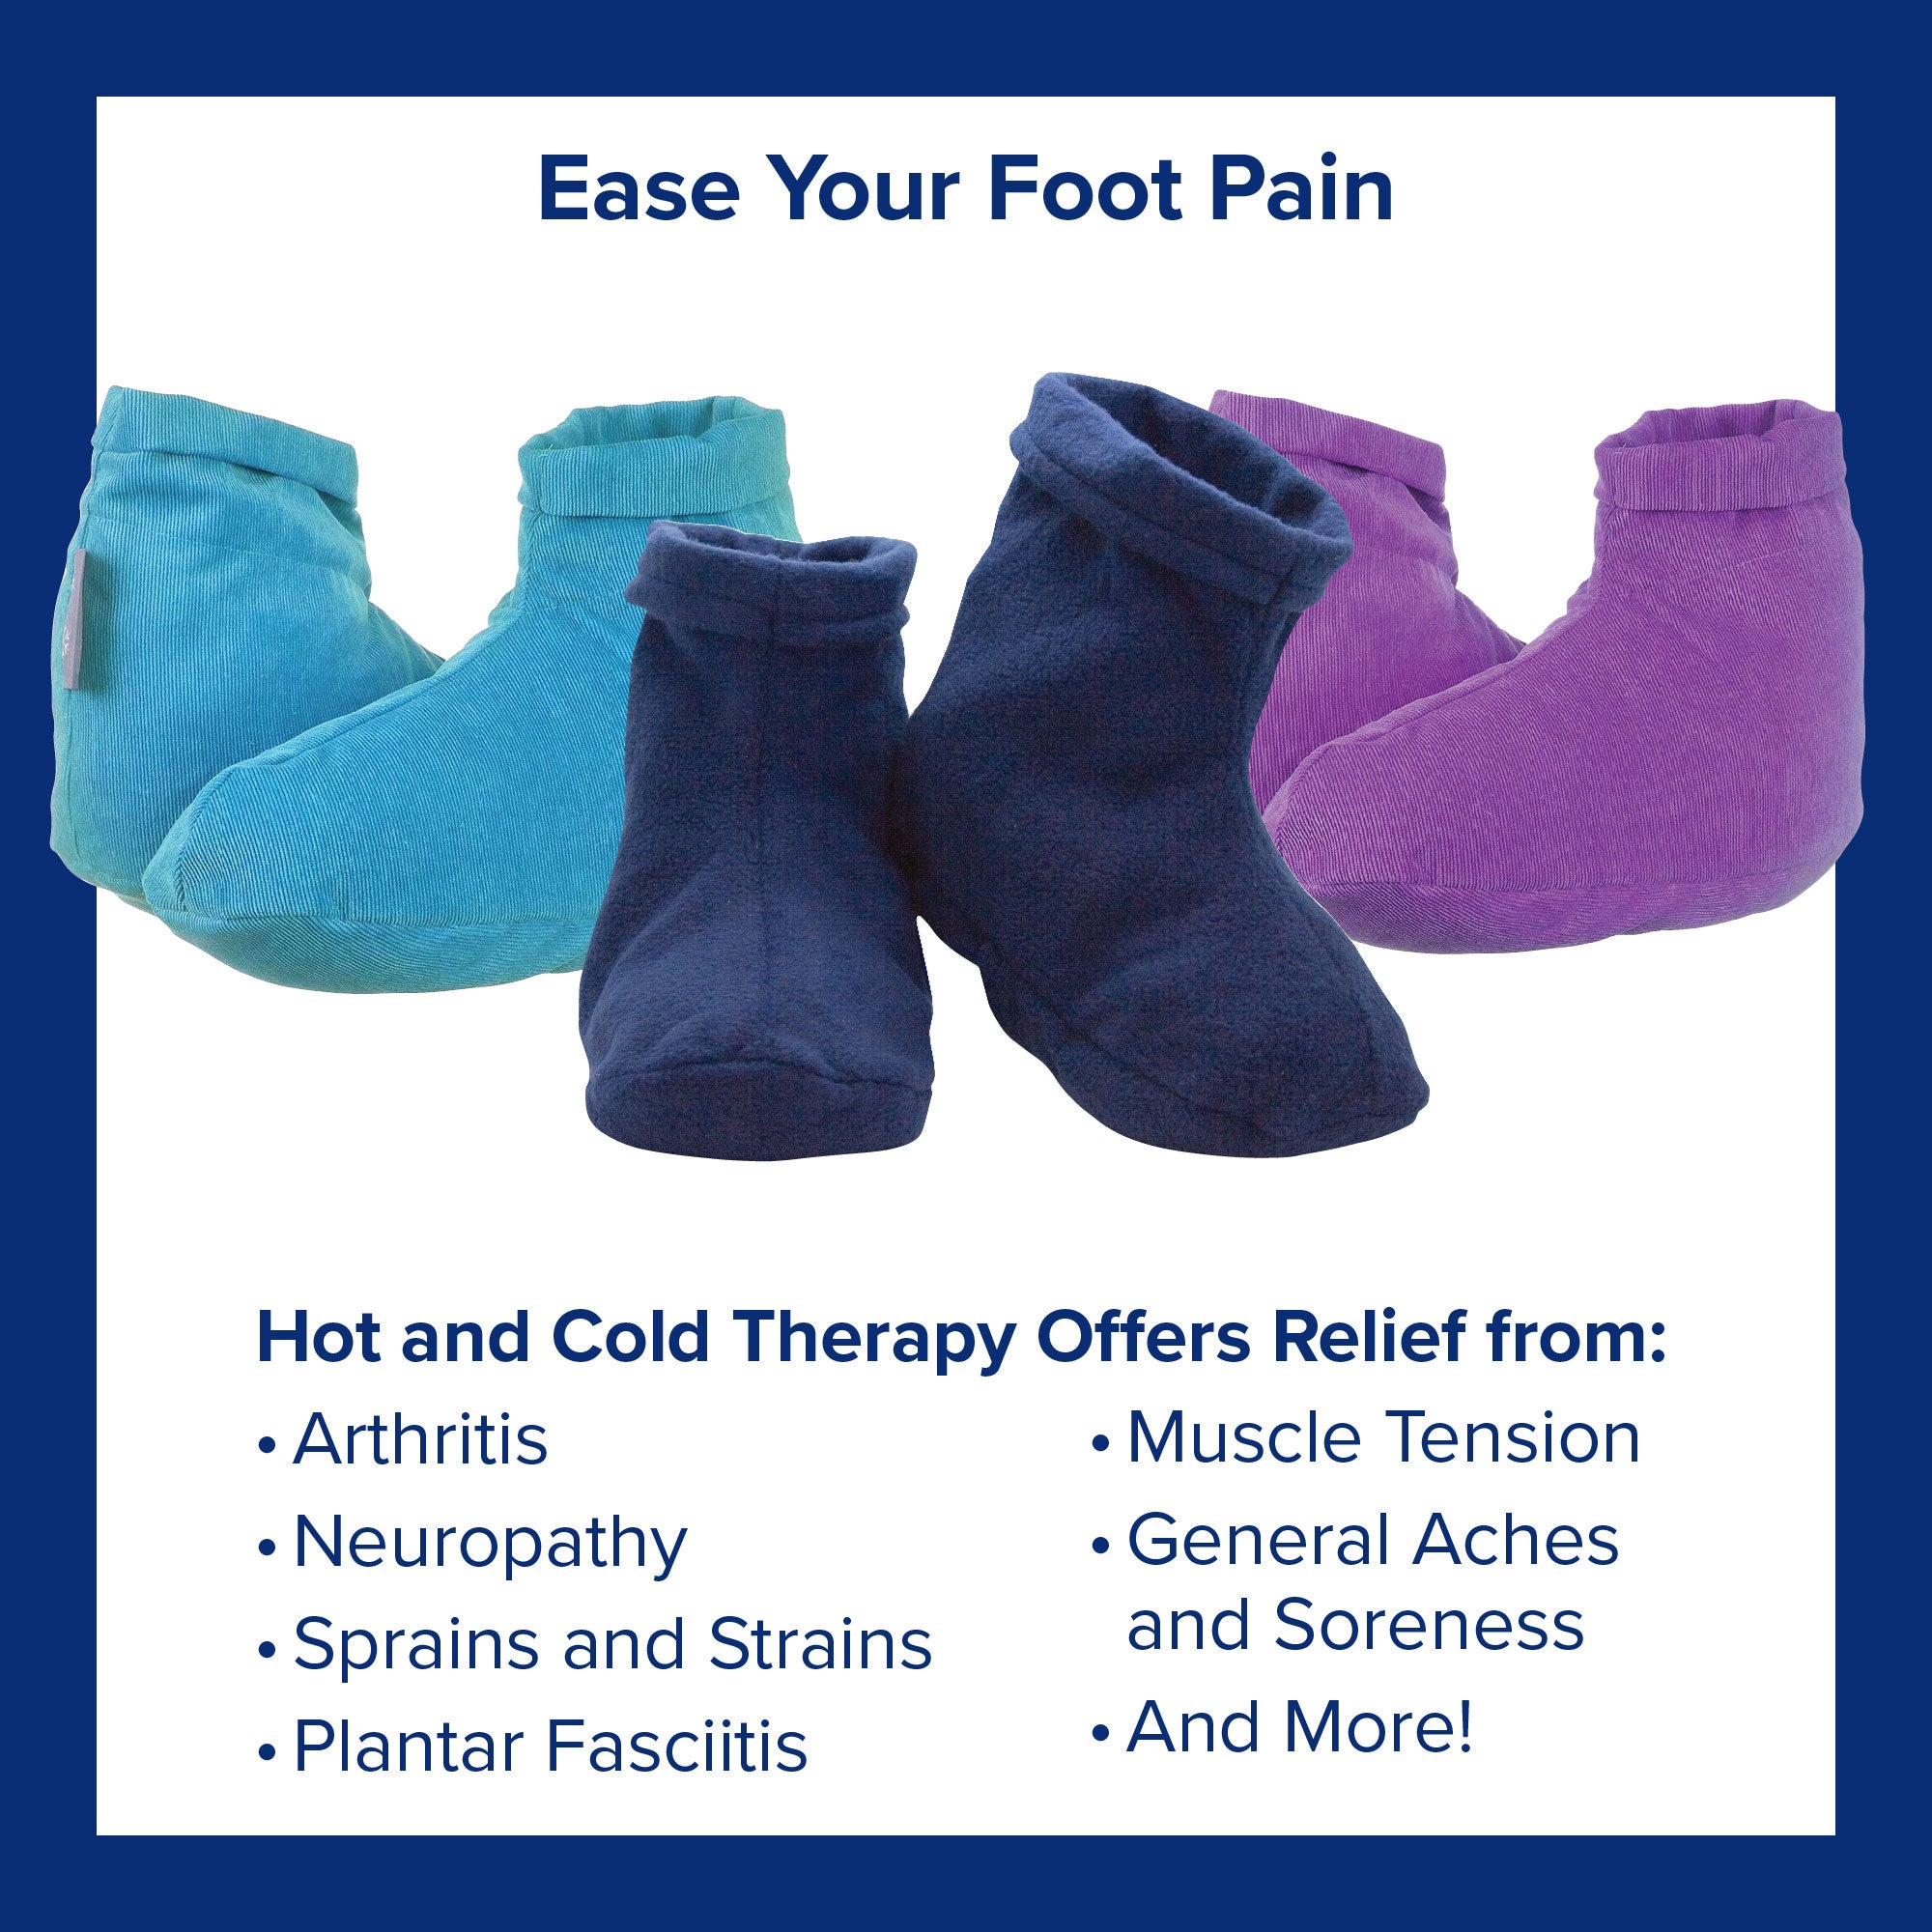 Three pairs of foot warmers next to text, 